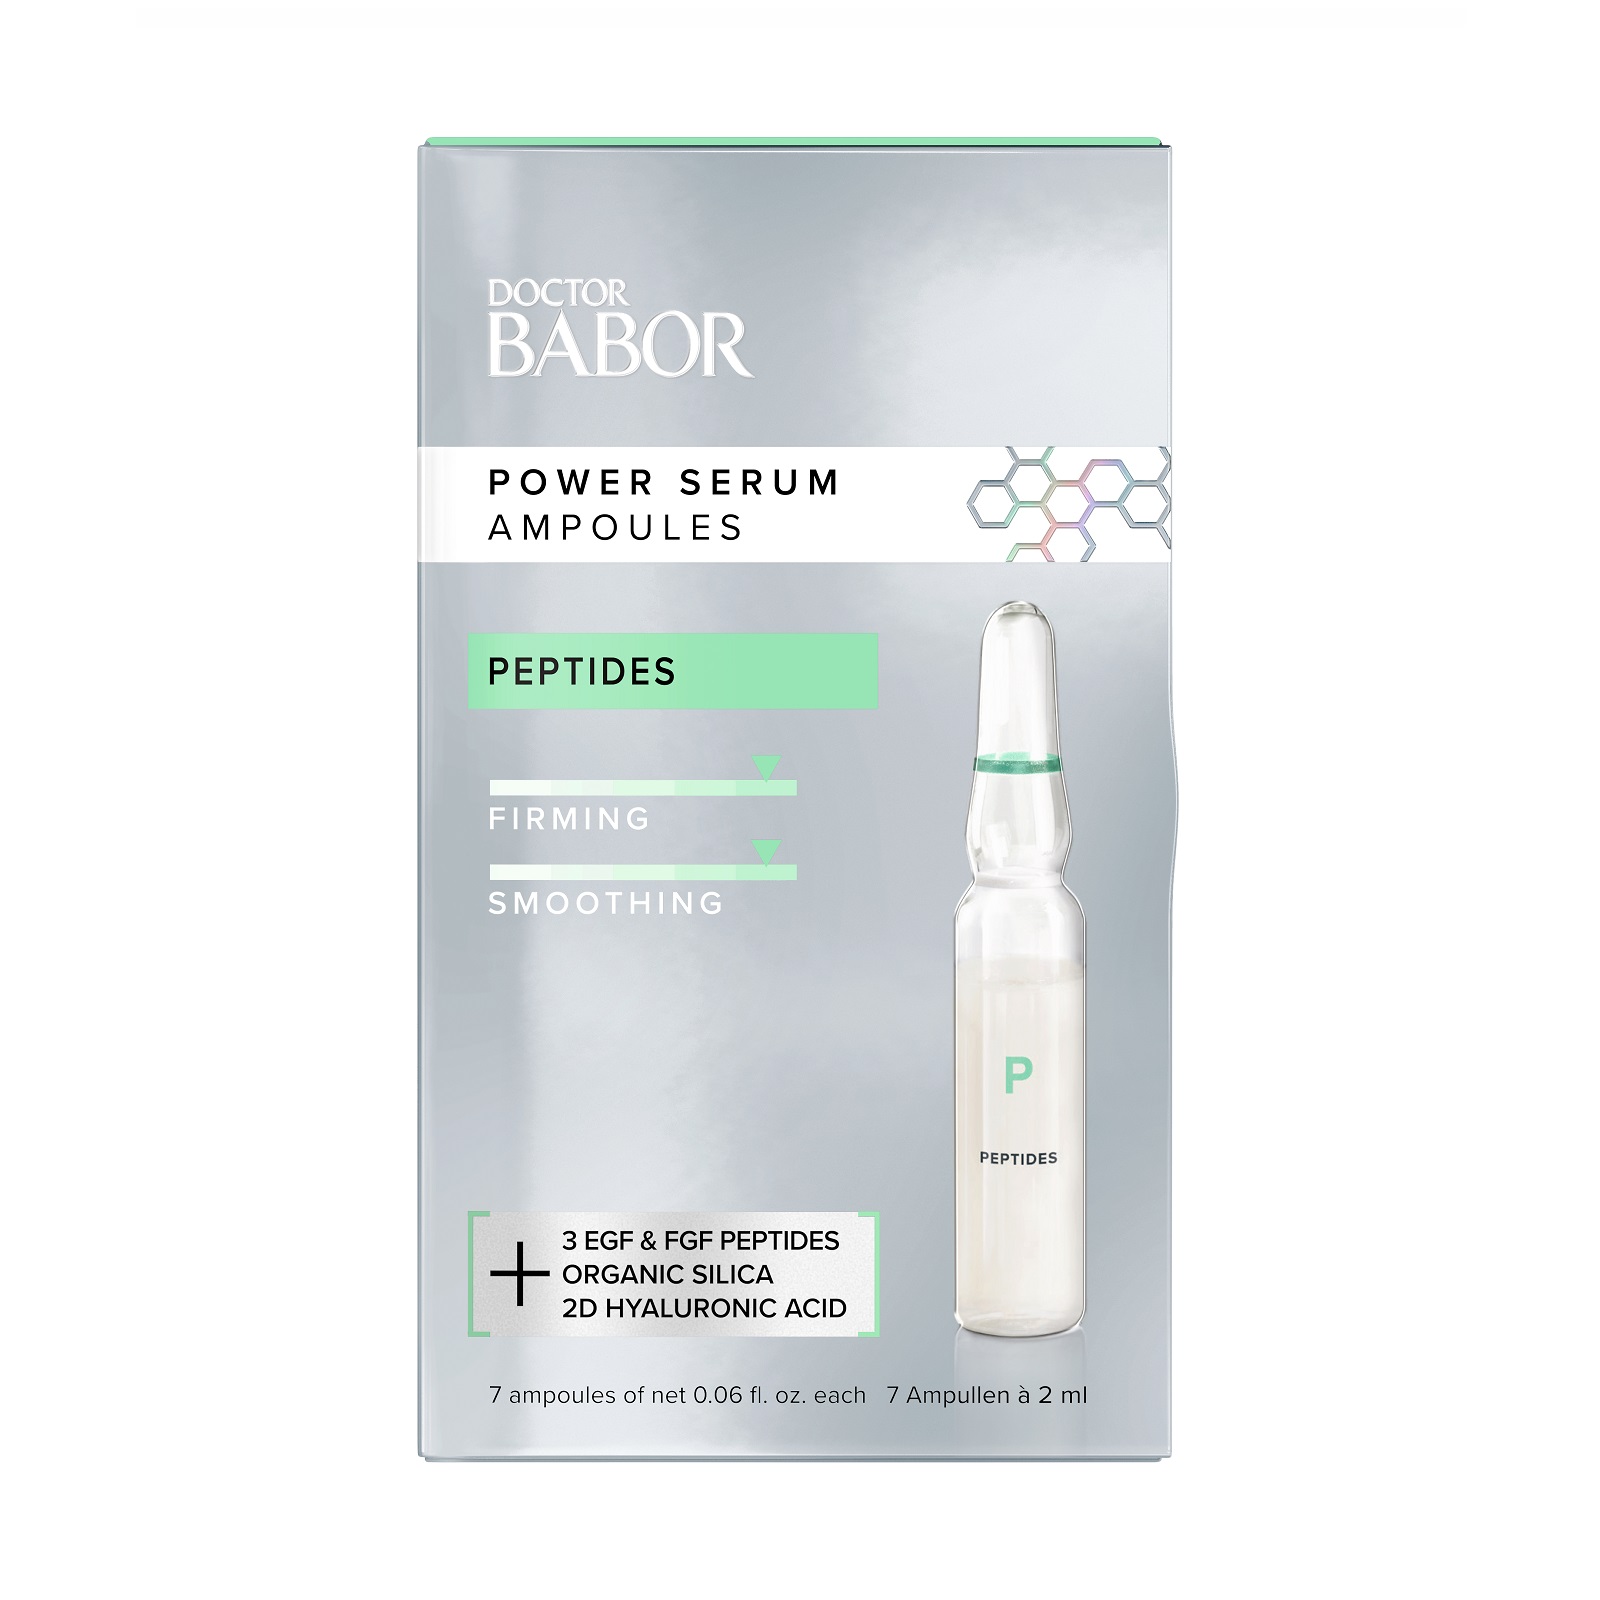 Dr. BABOR Power Serum Ampoules PEPTIDES